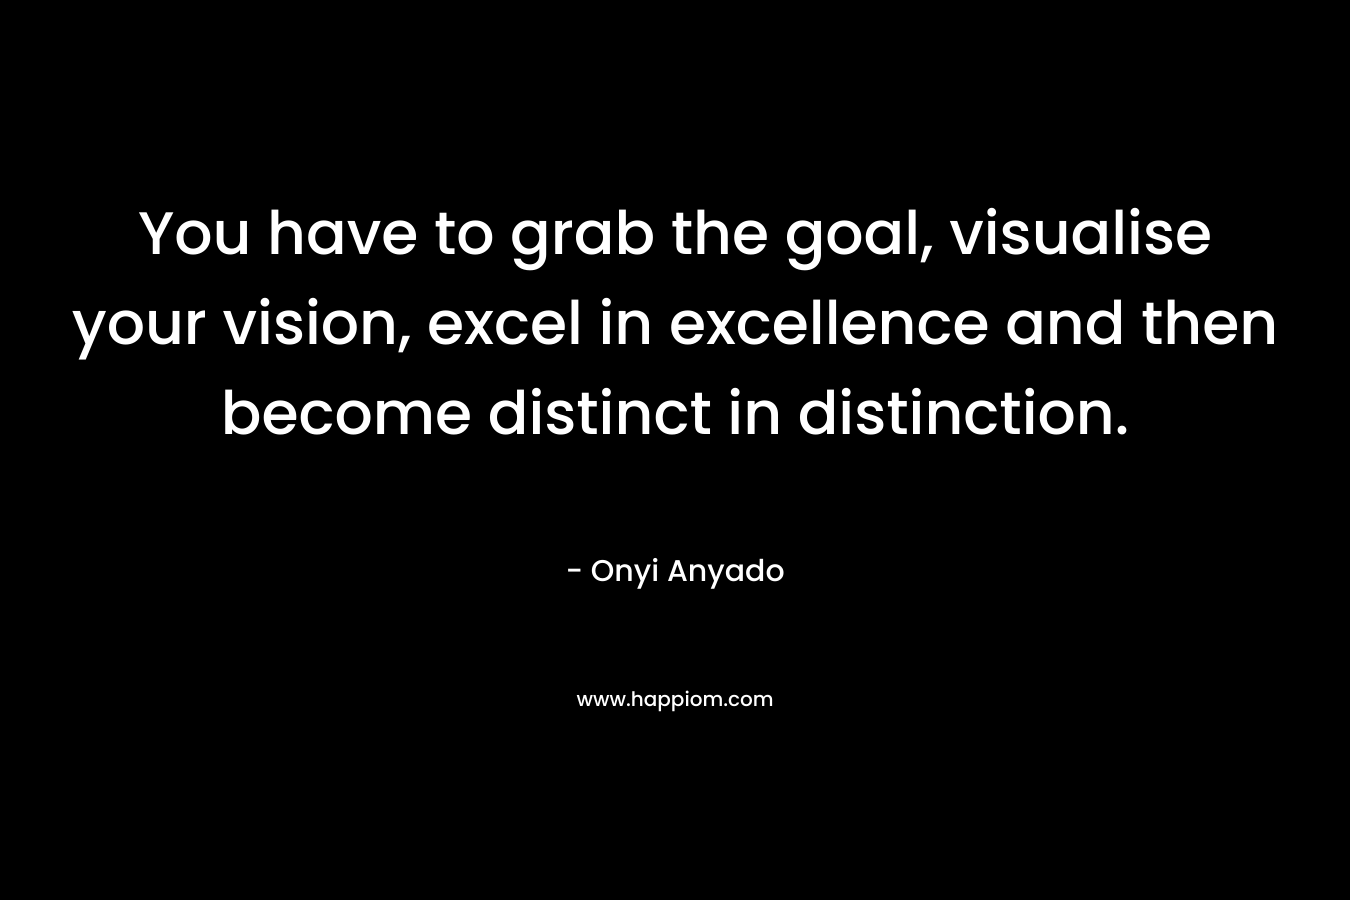 You have to grab the goal, visualise your vision, excel in excellence and then become distinct in distinction. – Onyi Anyado